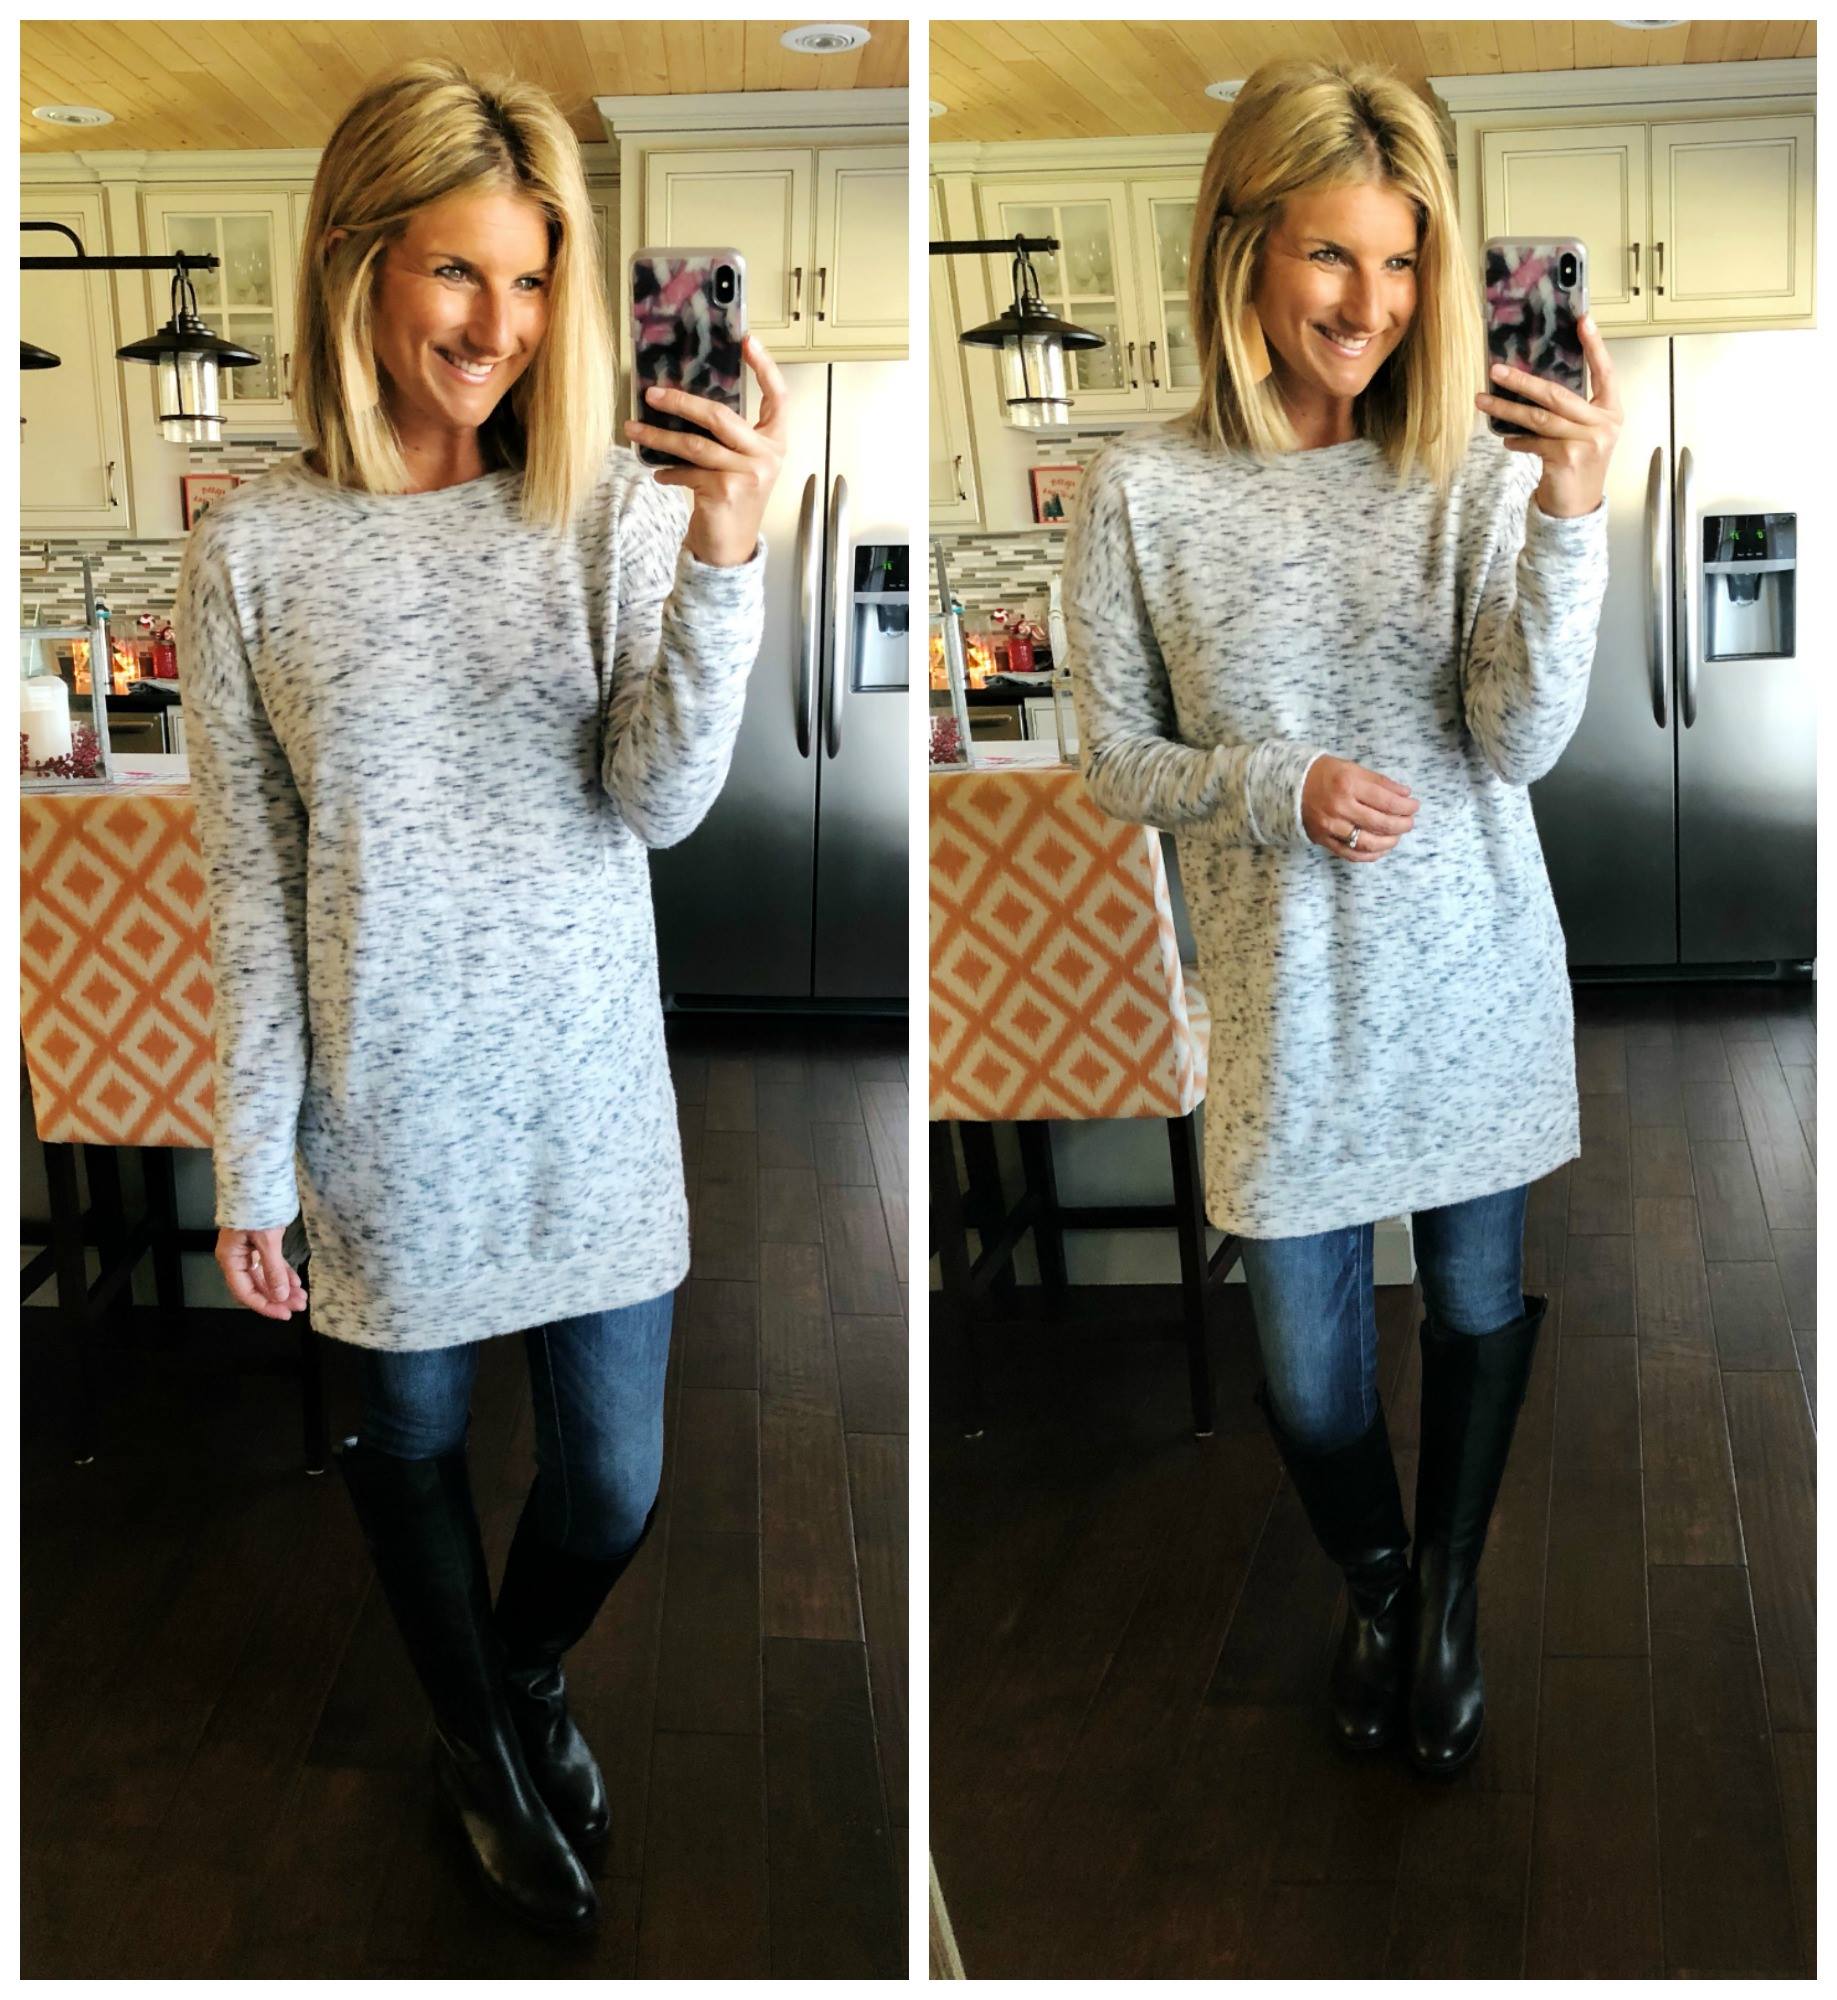 How to Wear a Tunic with Knee High Boots